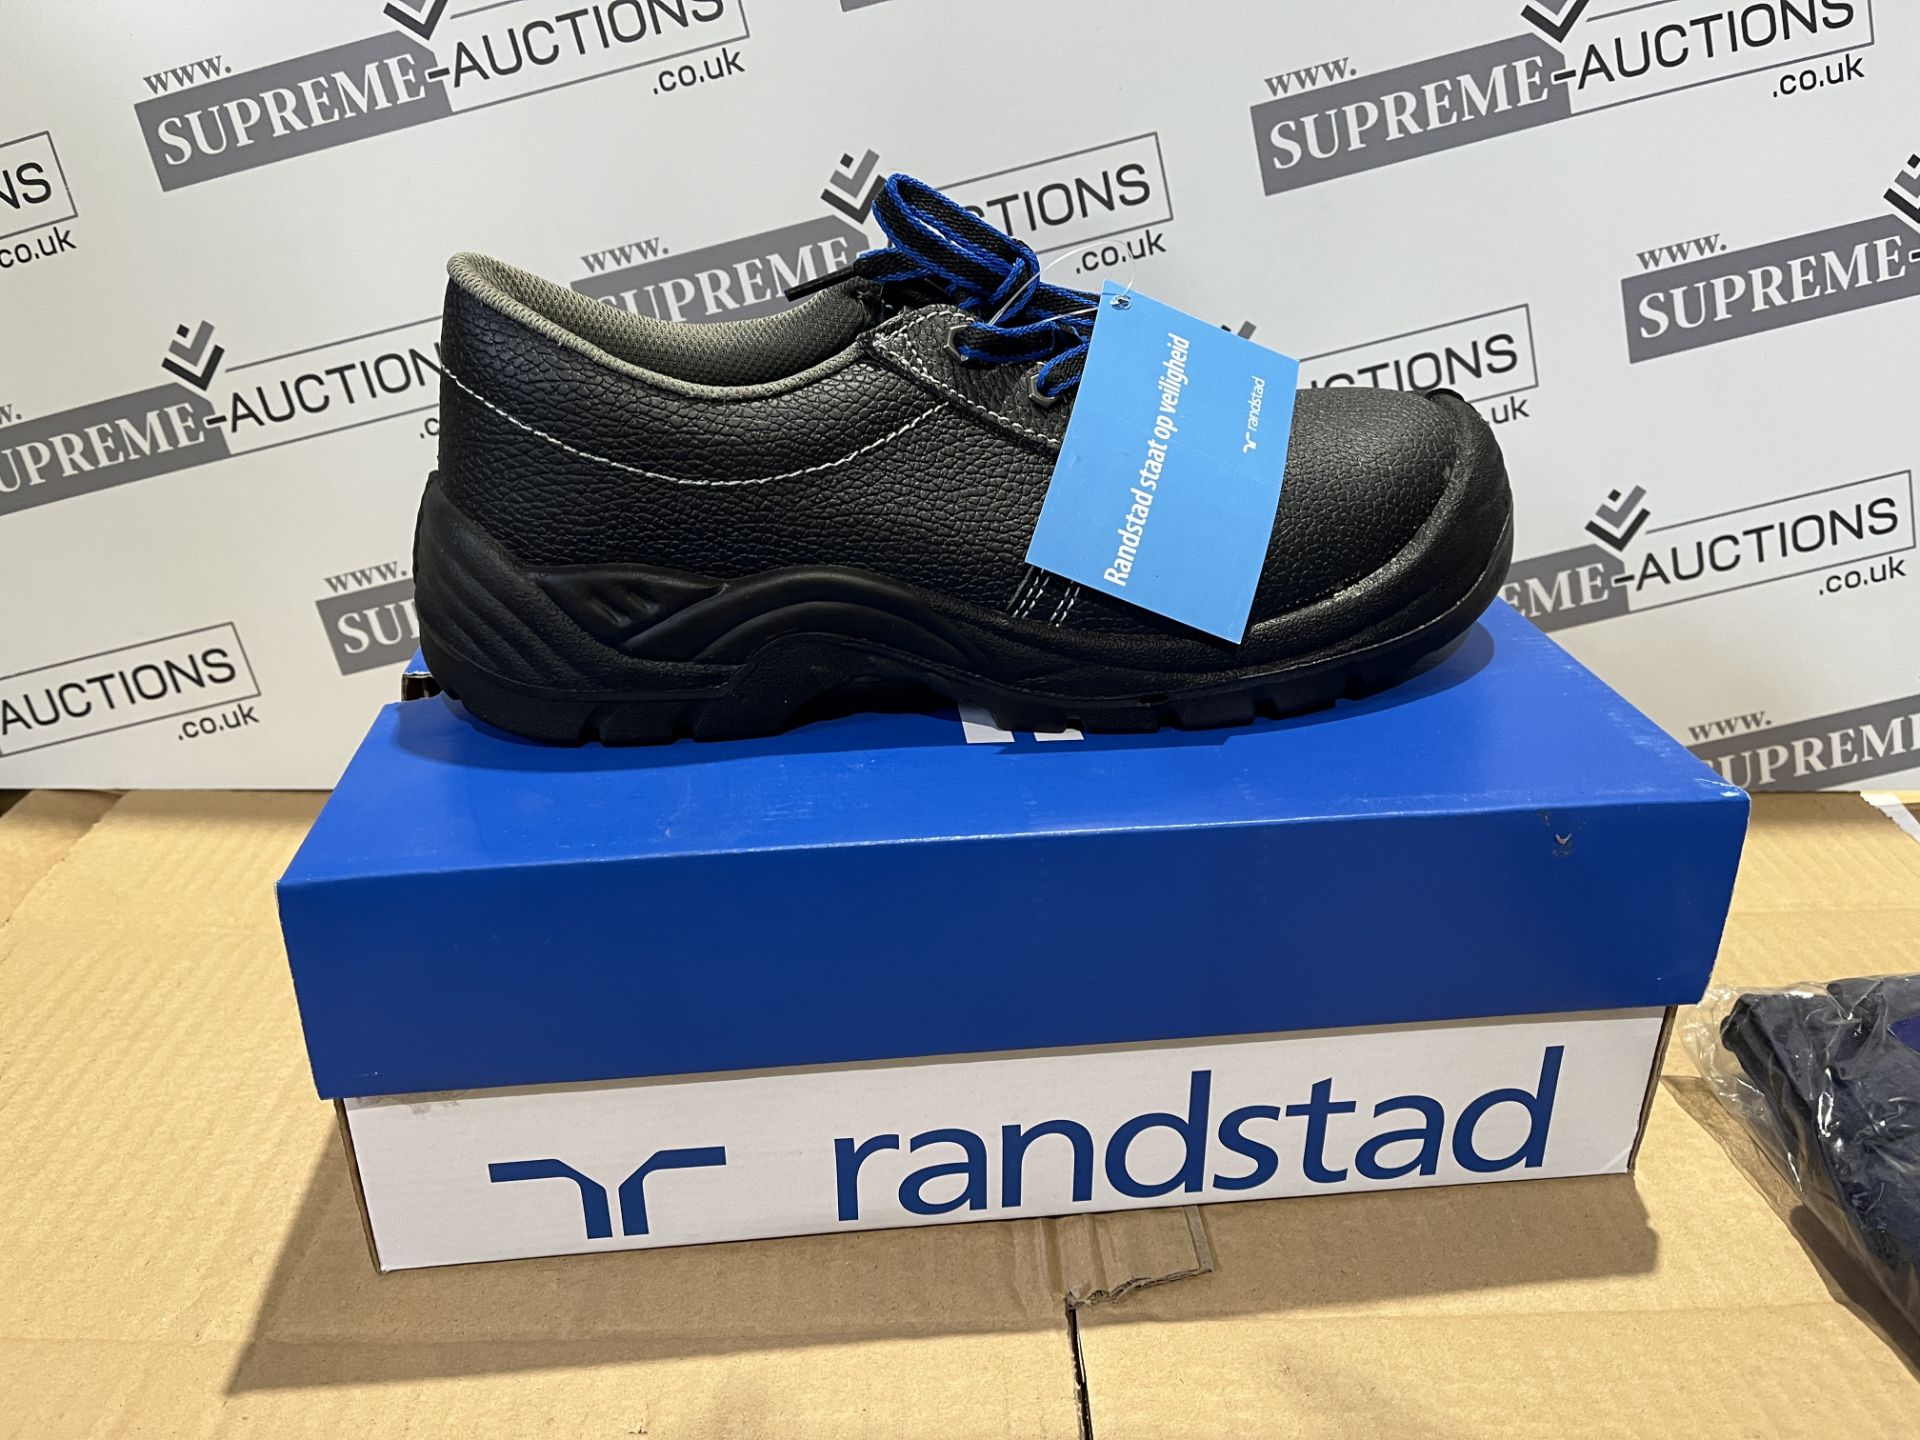 6 X BRAND NEW RAANDSTAAD PROFESSIONAL WORK BOOTS SIZE 45 S1-4